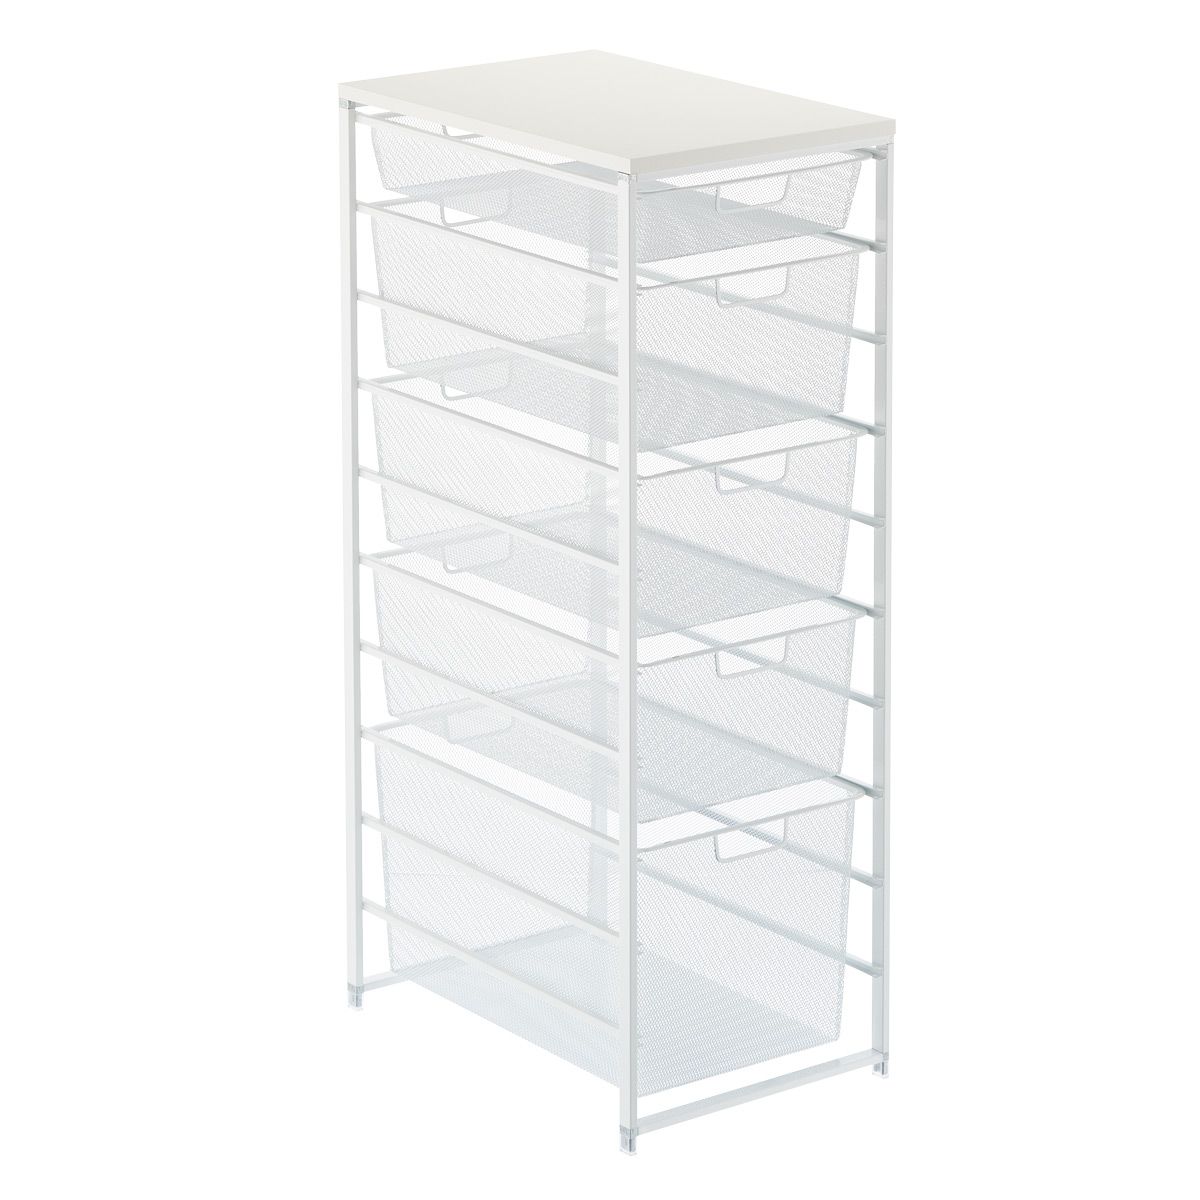 Narrow Mesh Dresser | The Container Store